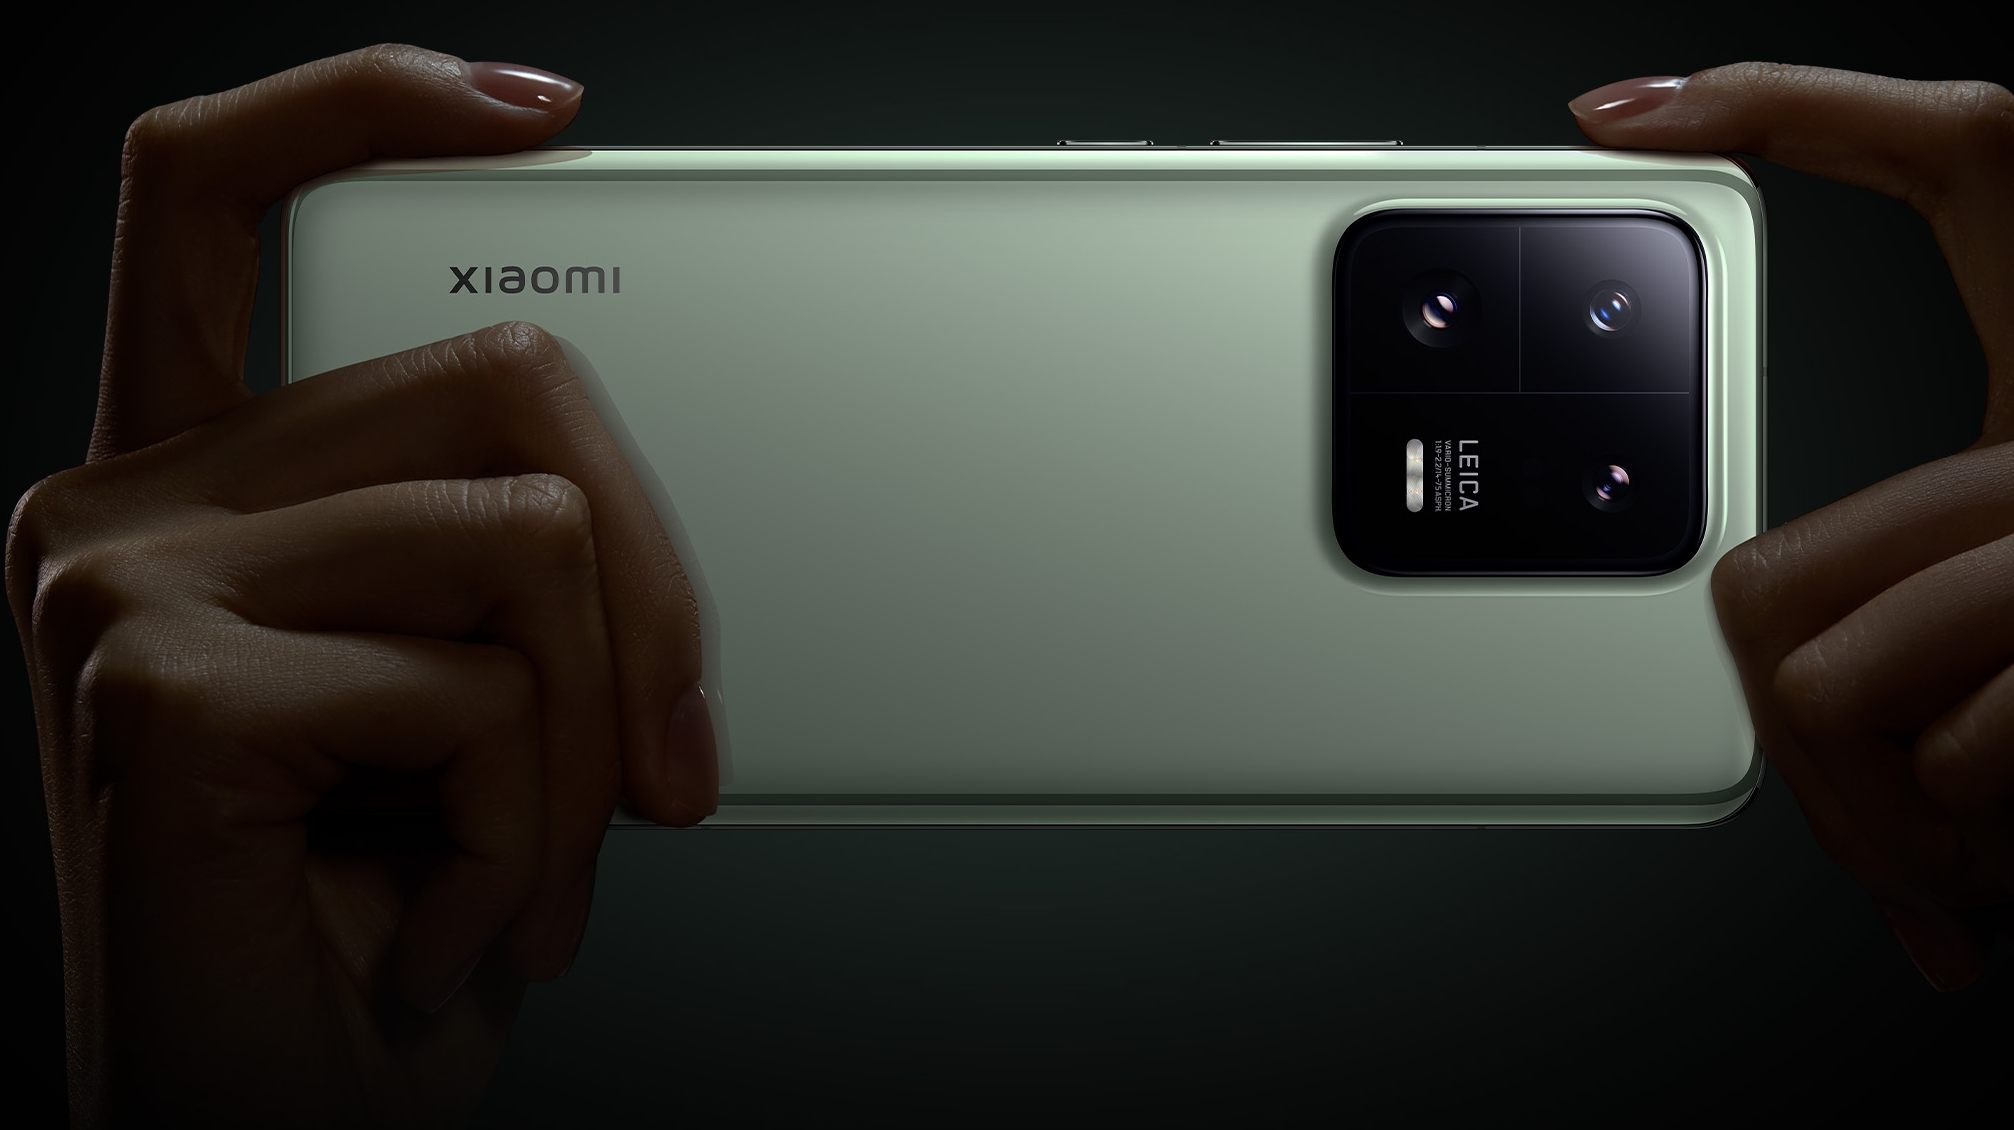 Xiaomi 13: everything you need to know